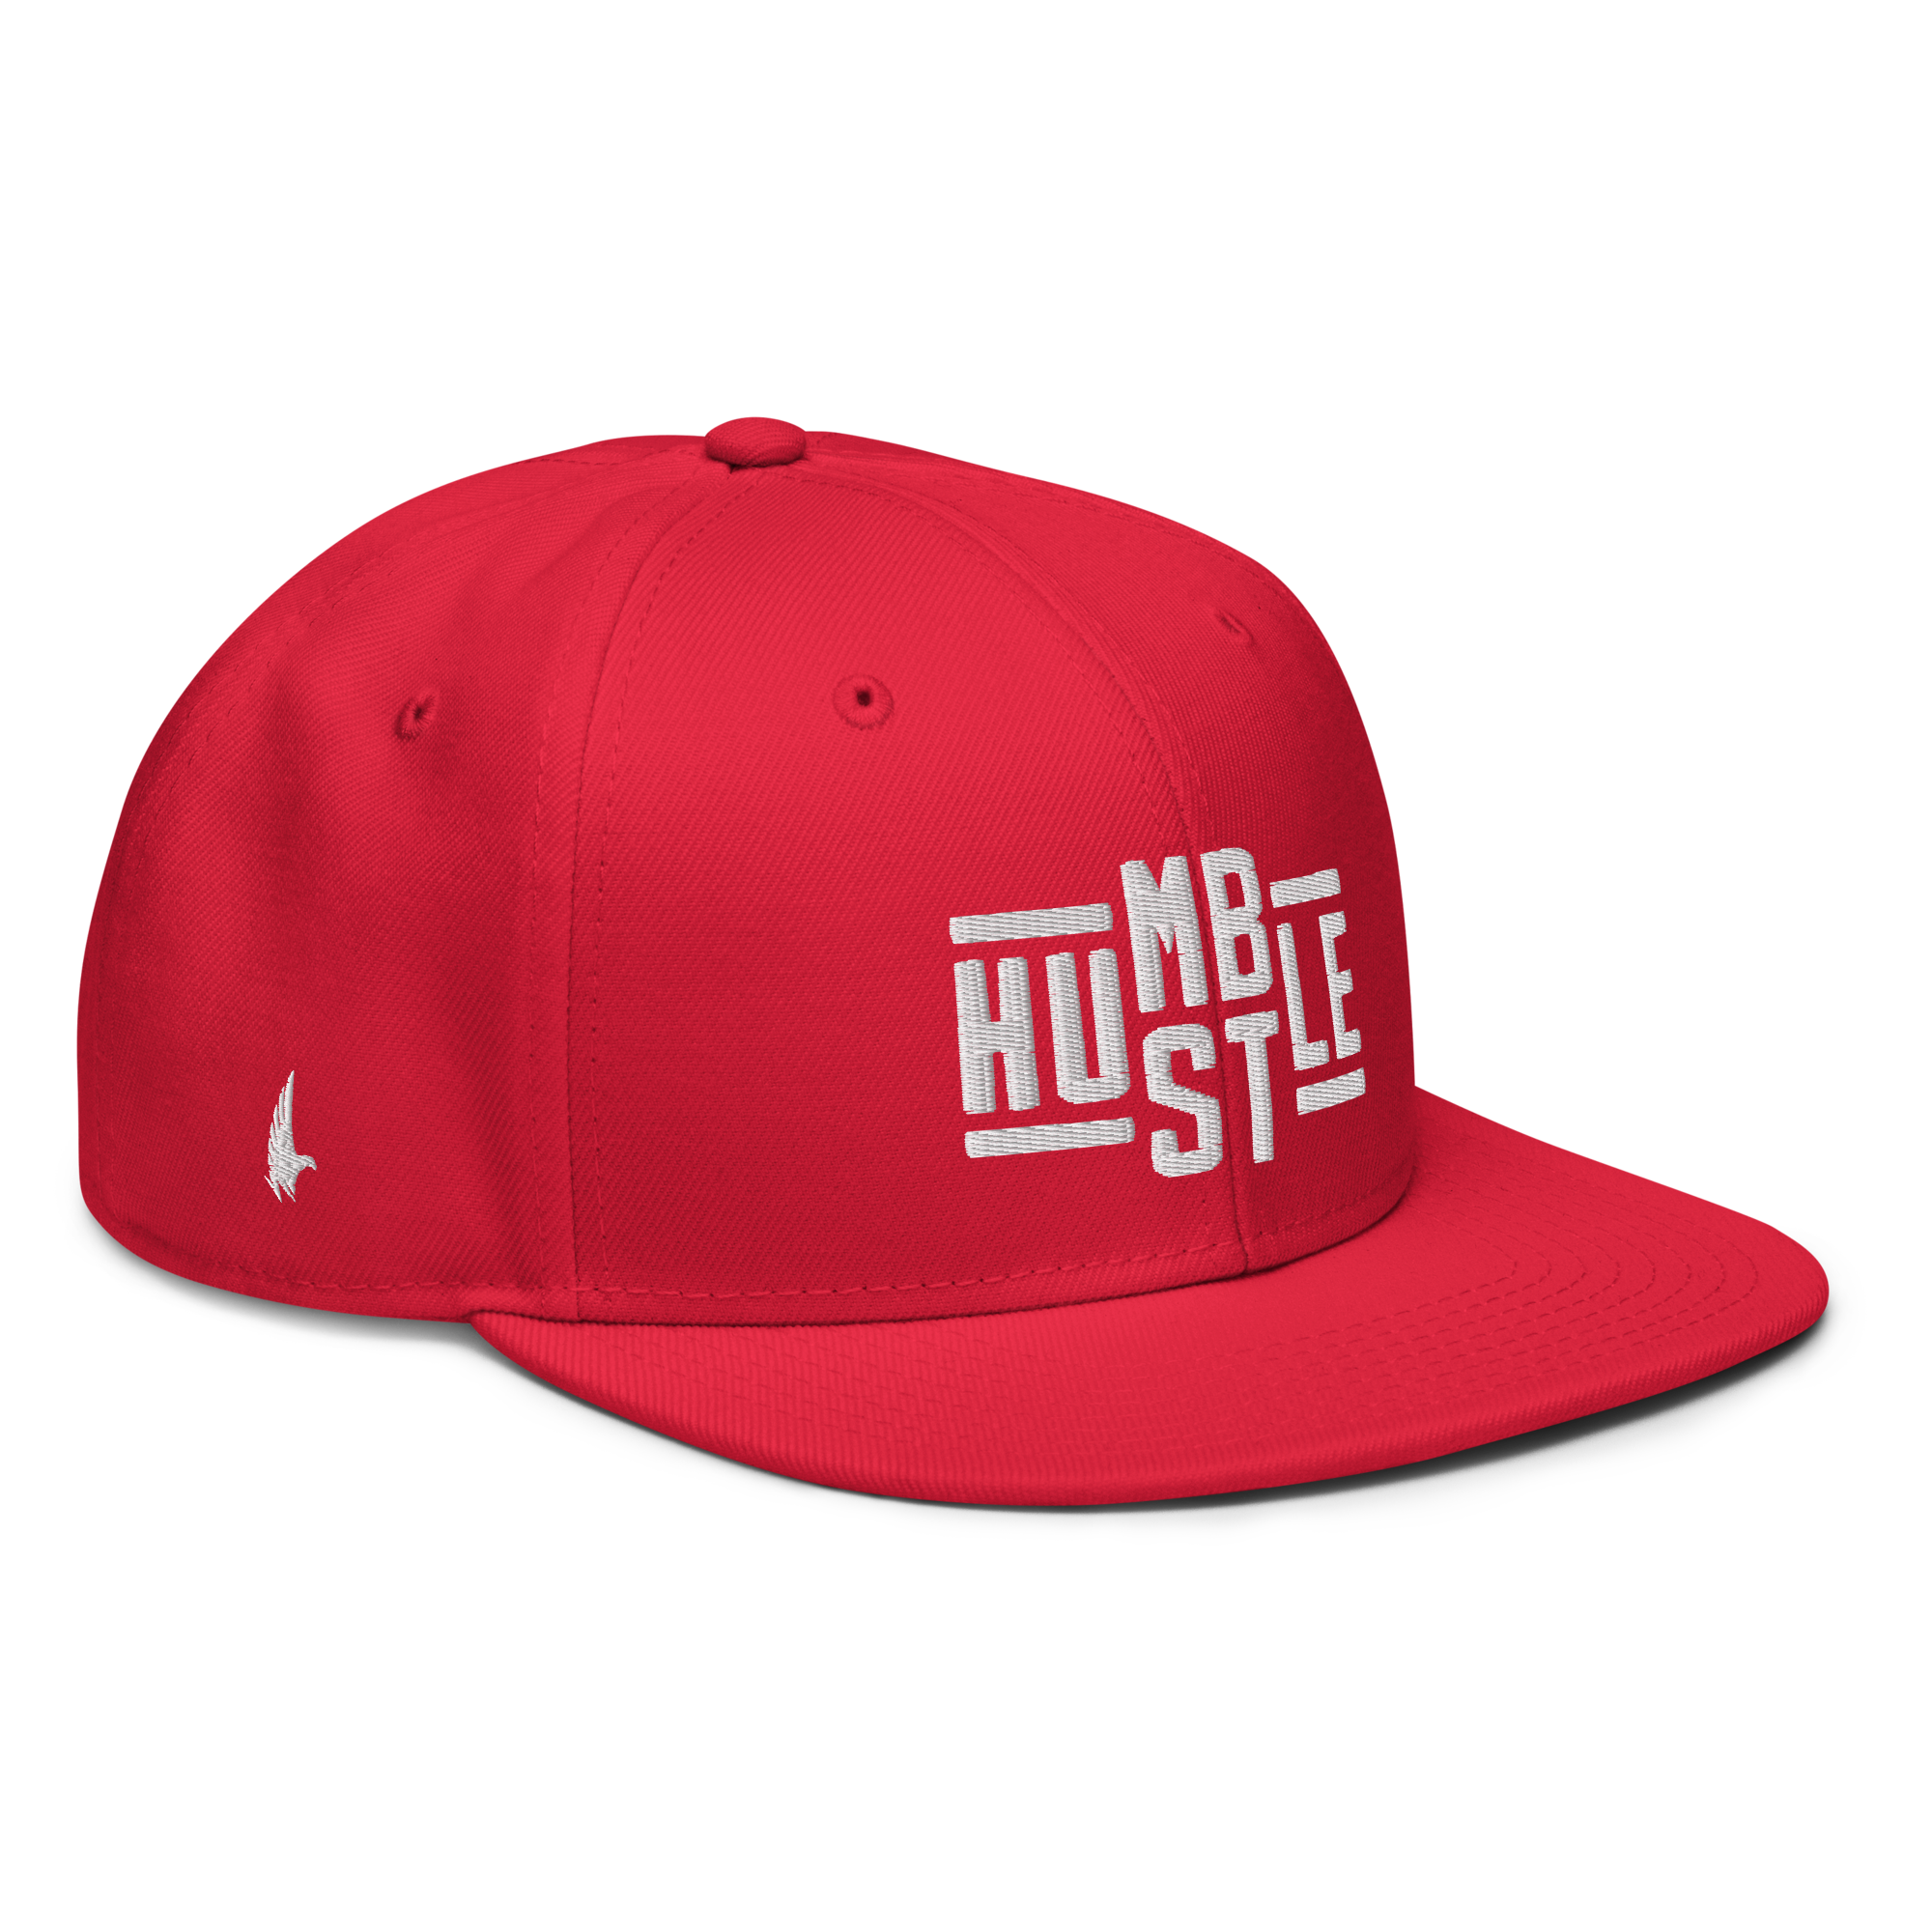 Hustle Snapback Hat - Red/White OS - Loyalty Vibes